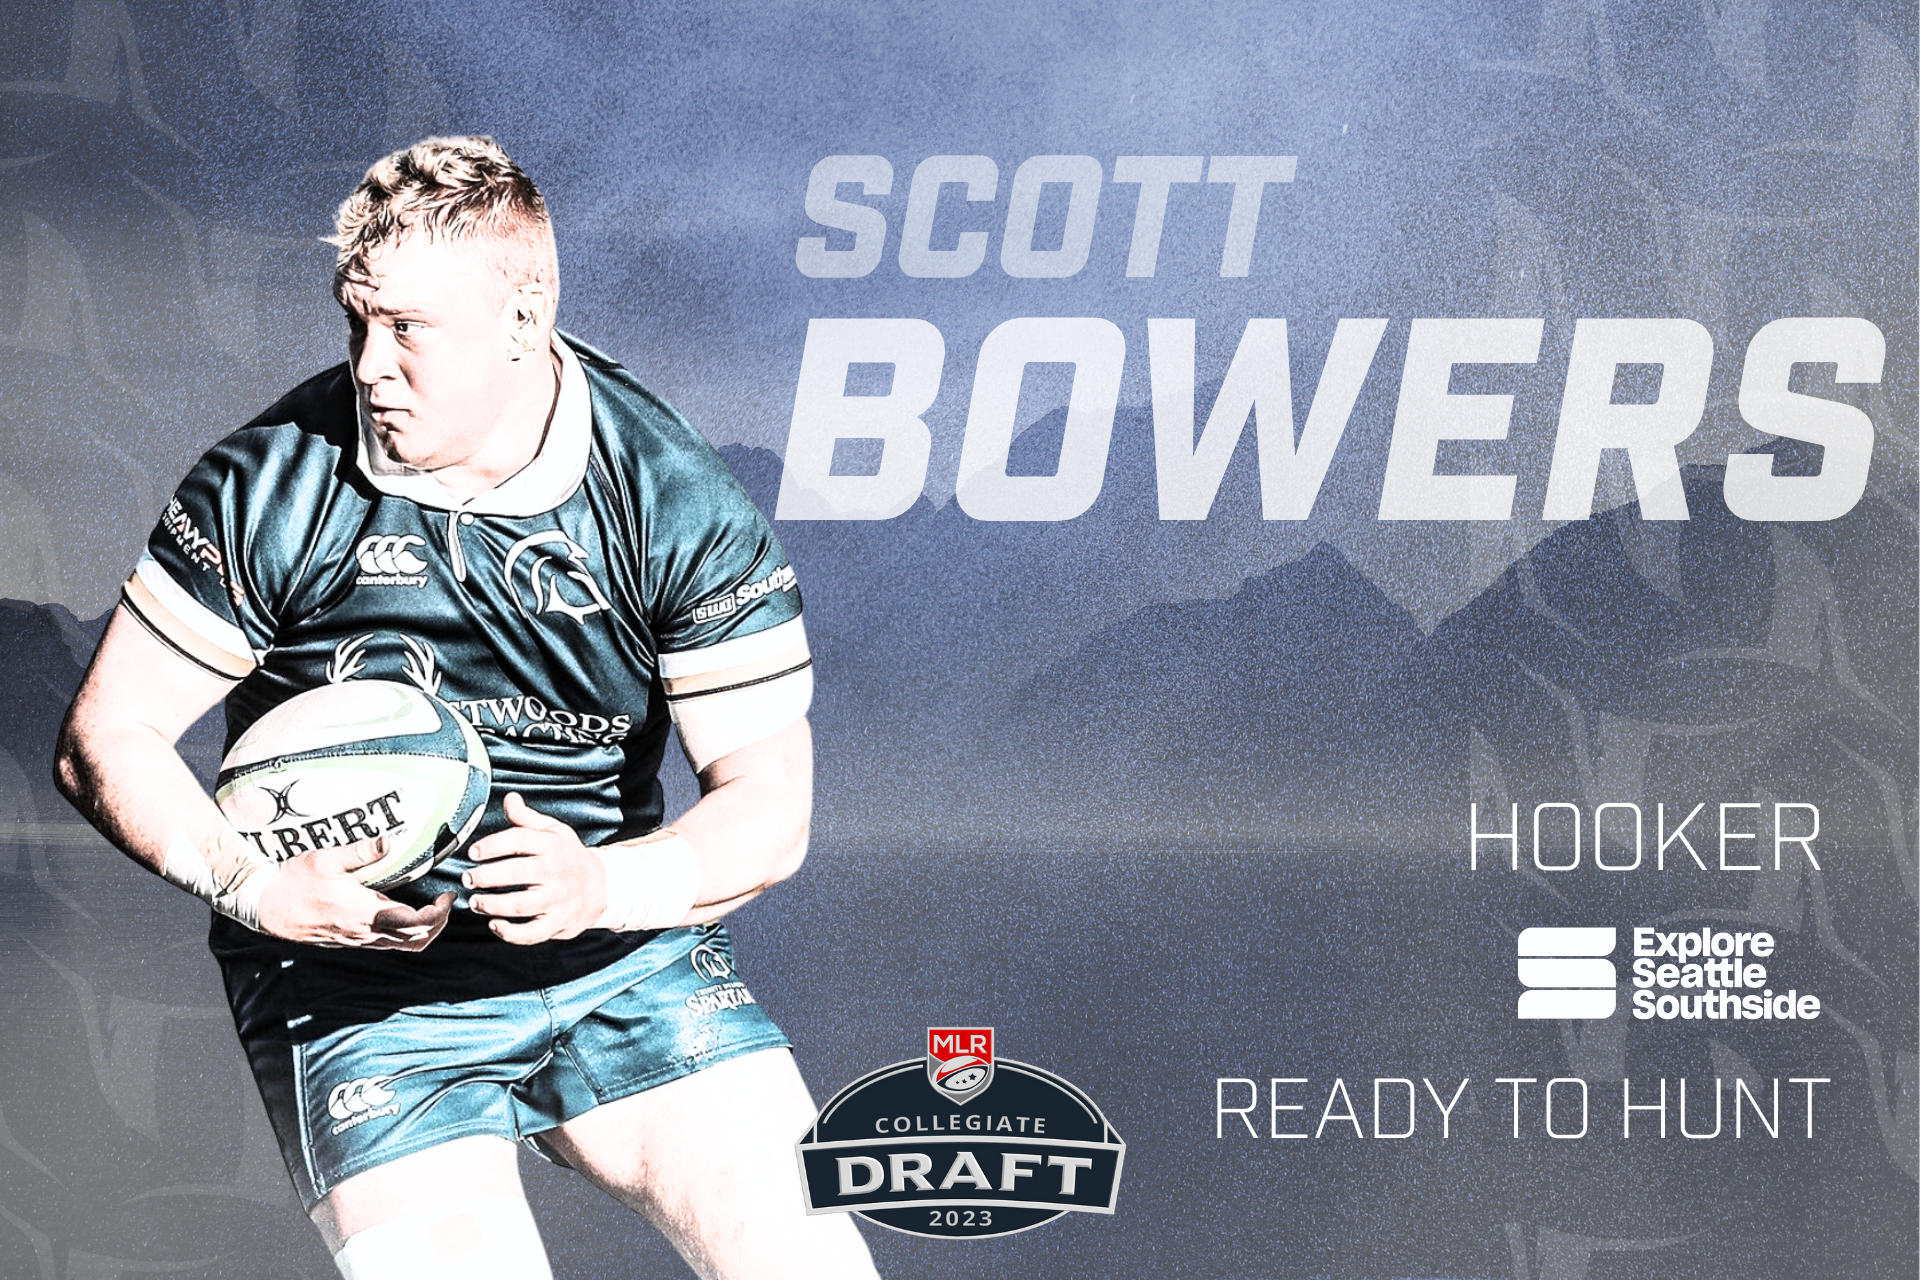 SCOTT BOWERS  DRAFTED IN 2023 MLR DRAFT TO JOIN SEAWOLVES RUGBY